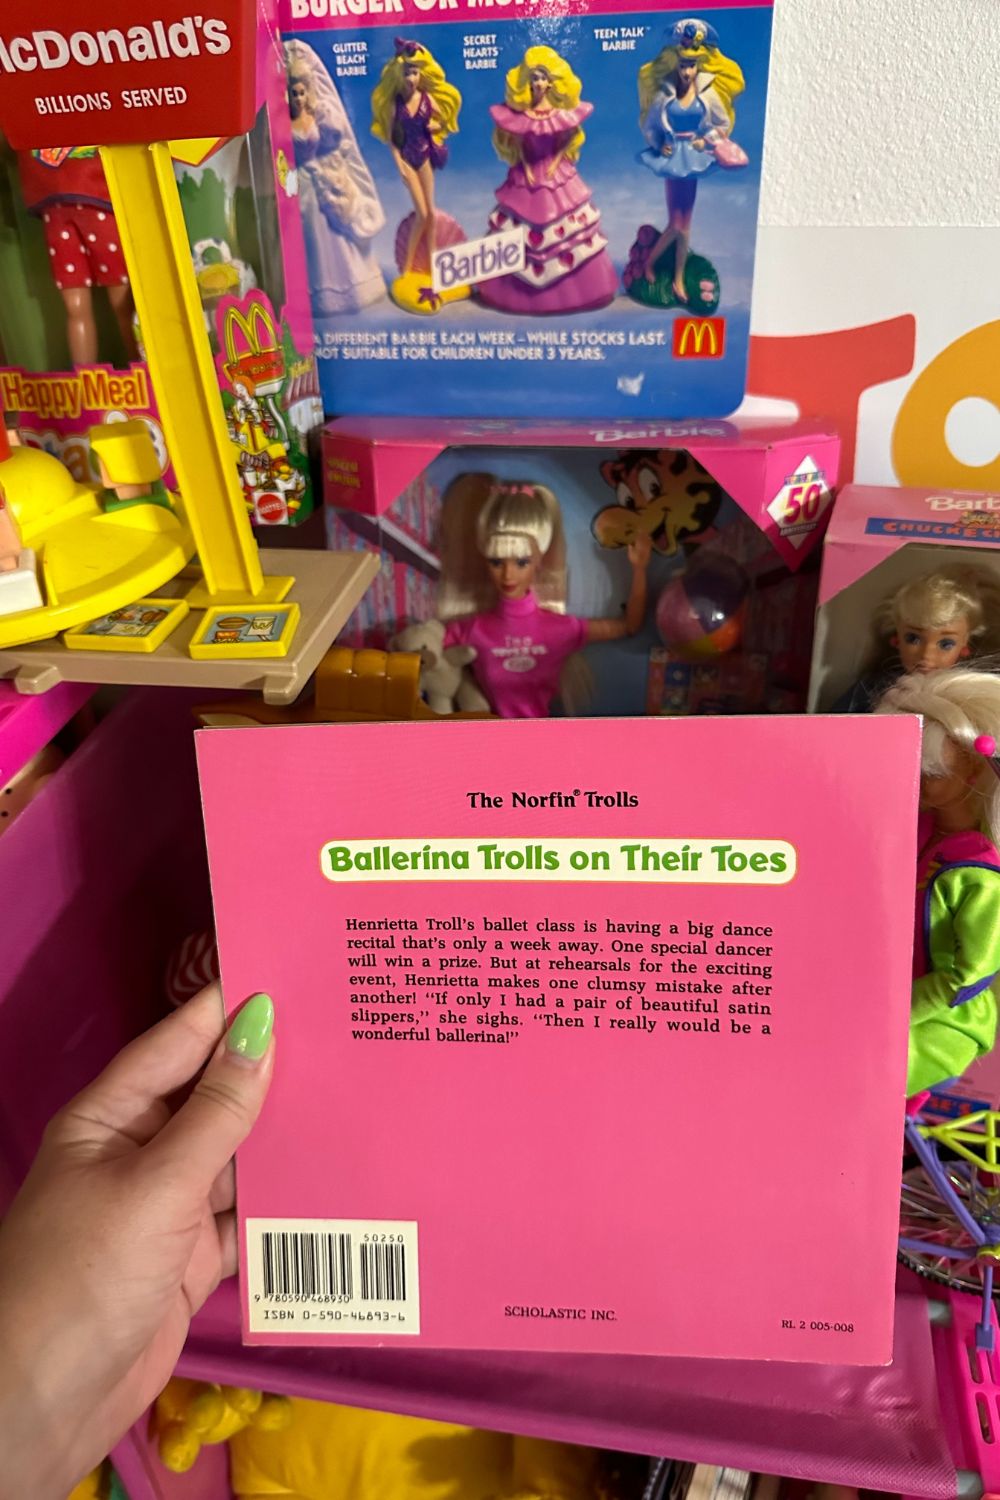 THE NORFIN TROLLS: BALLERINA TROLLS AND THEIR TOES BOOK*